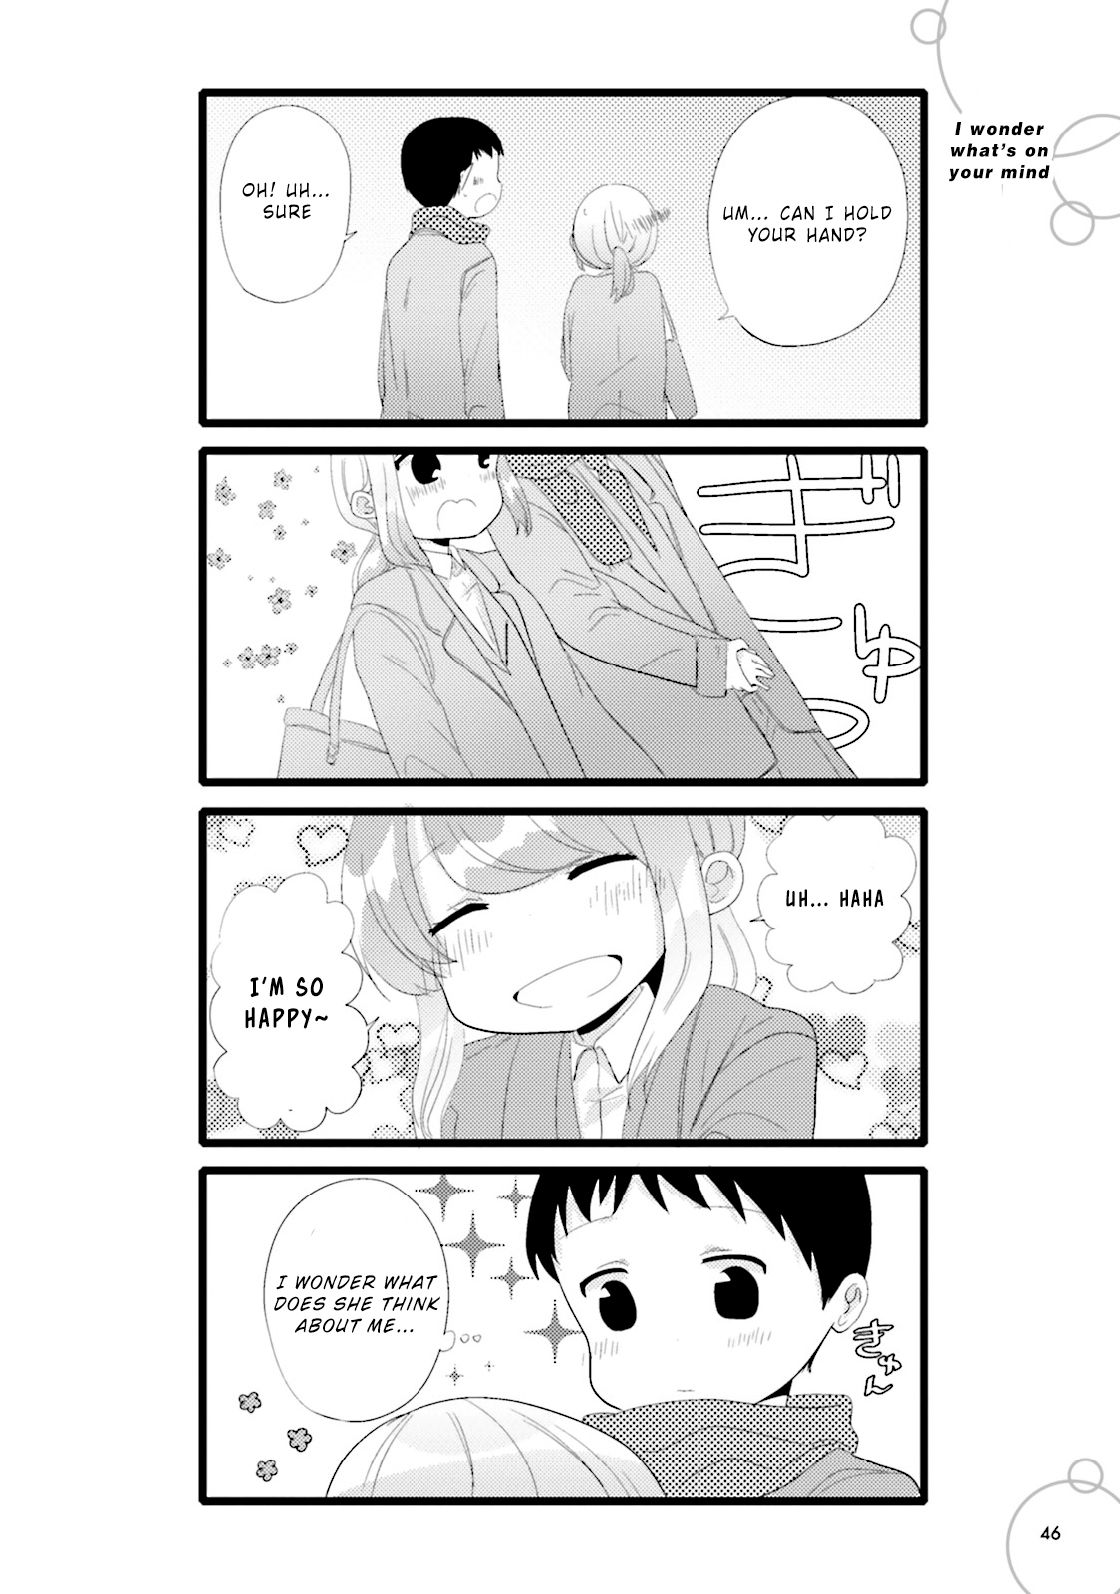 I'm In Trouble with Her Who Has Too Much Libido - chapter 40 - #1